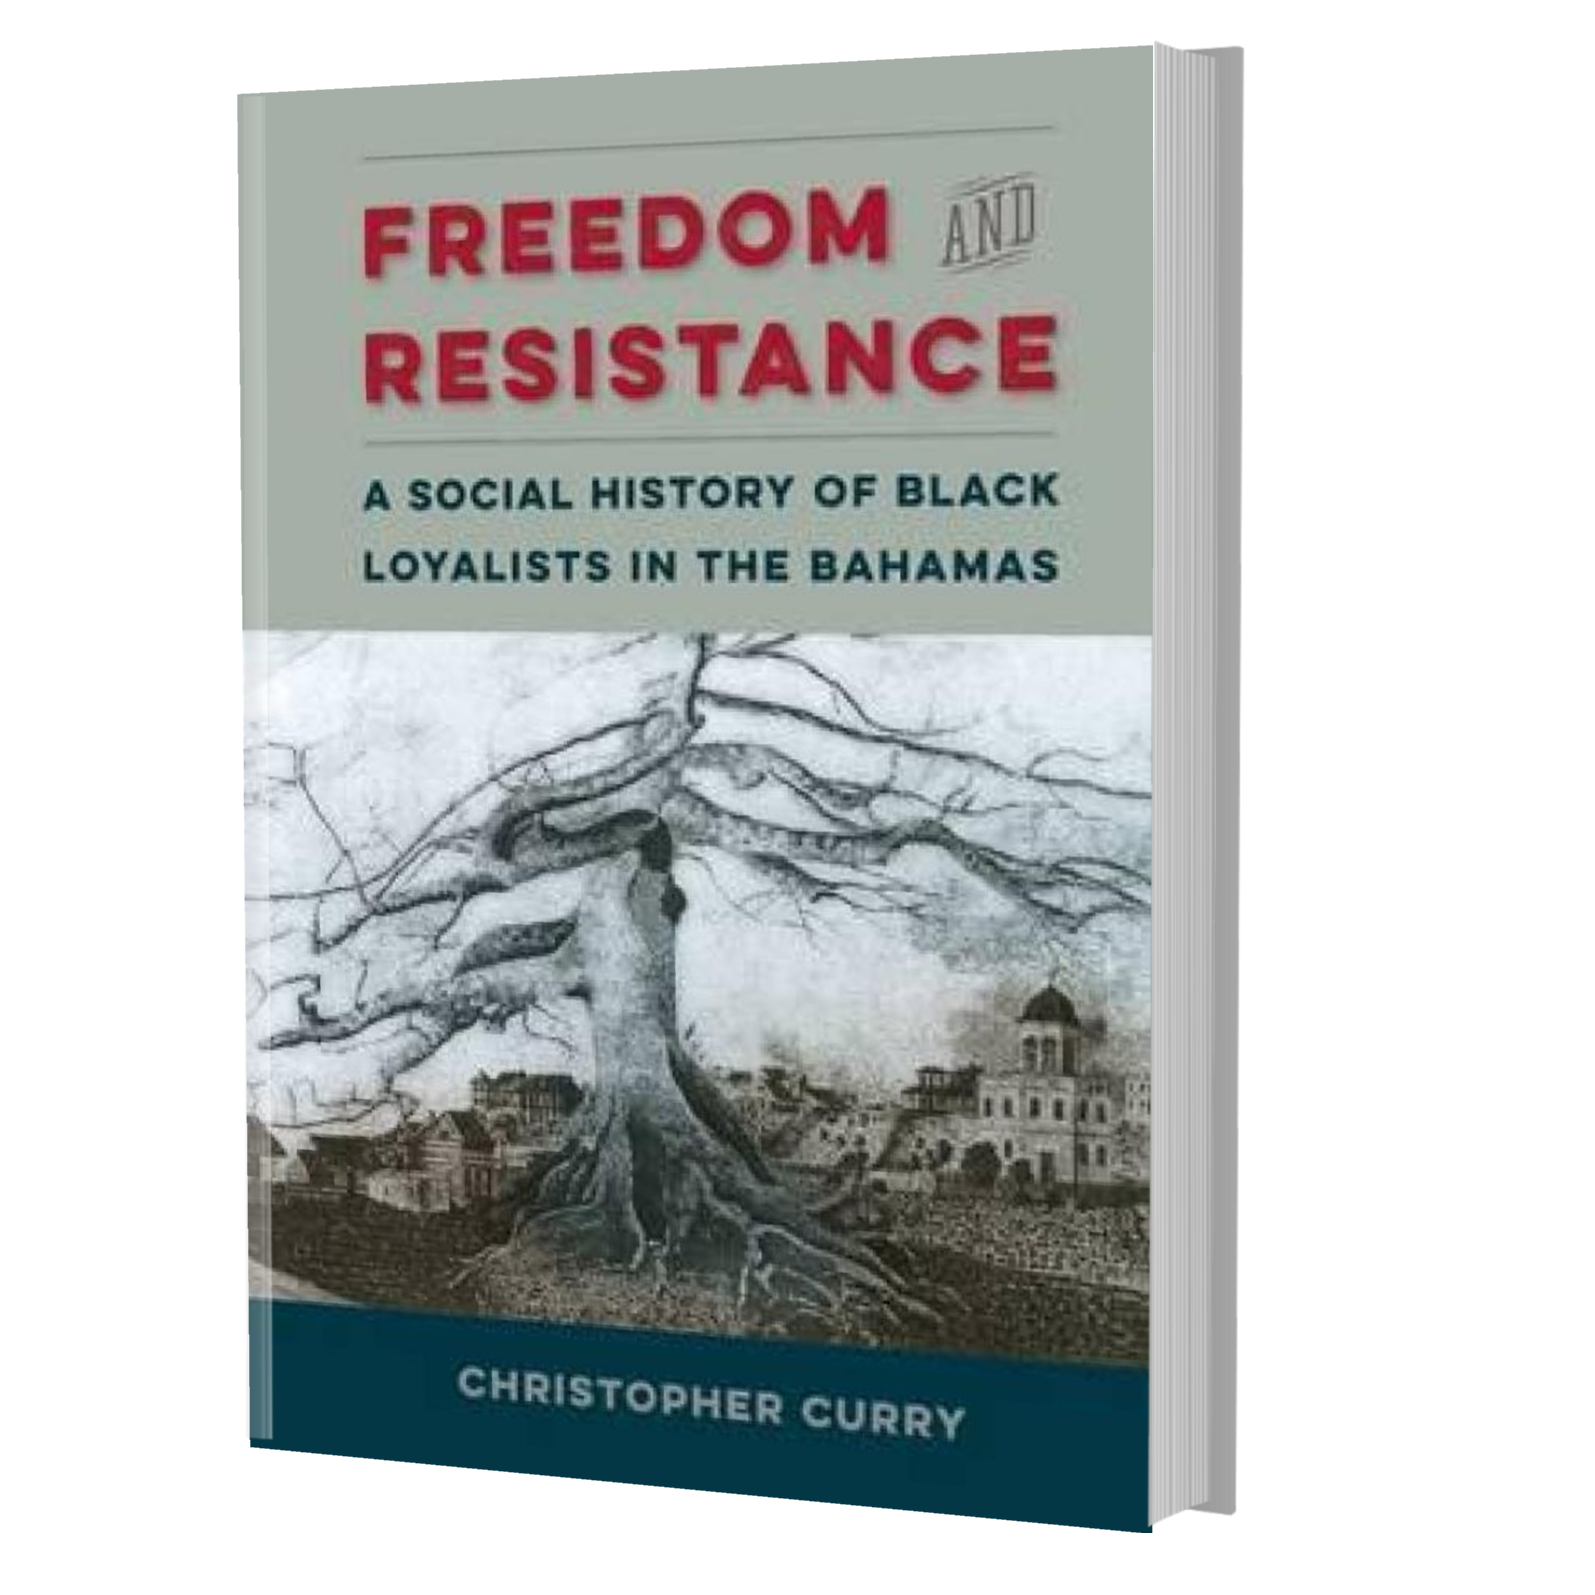 Freedom and Resistance